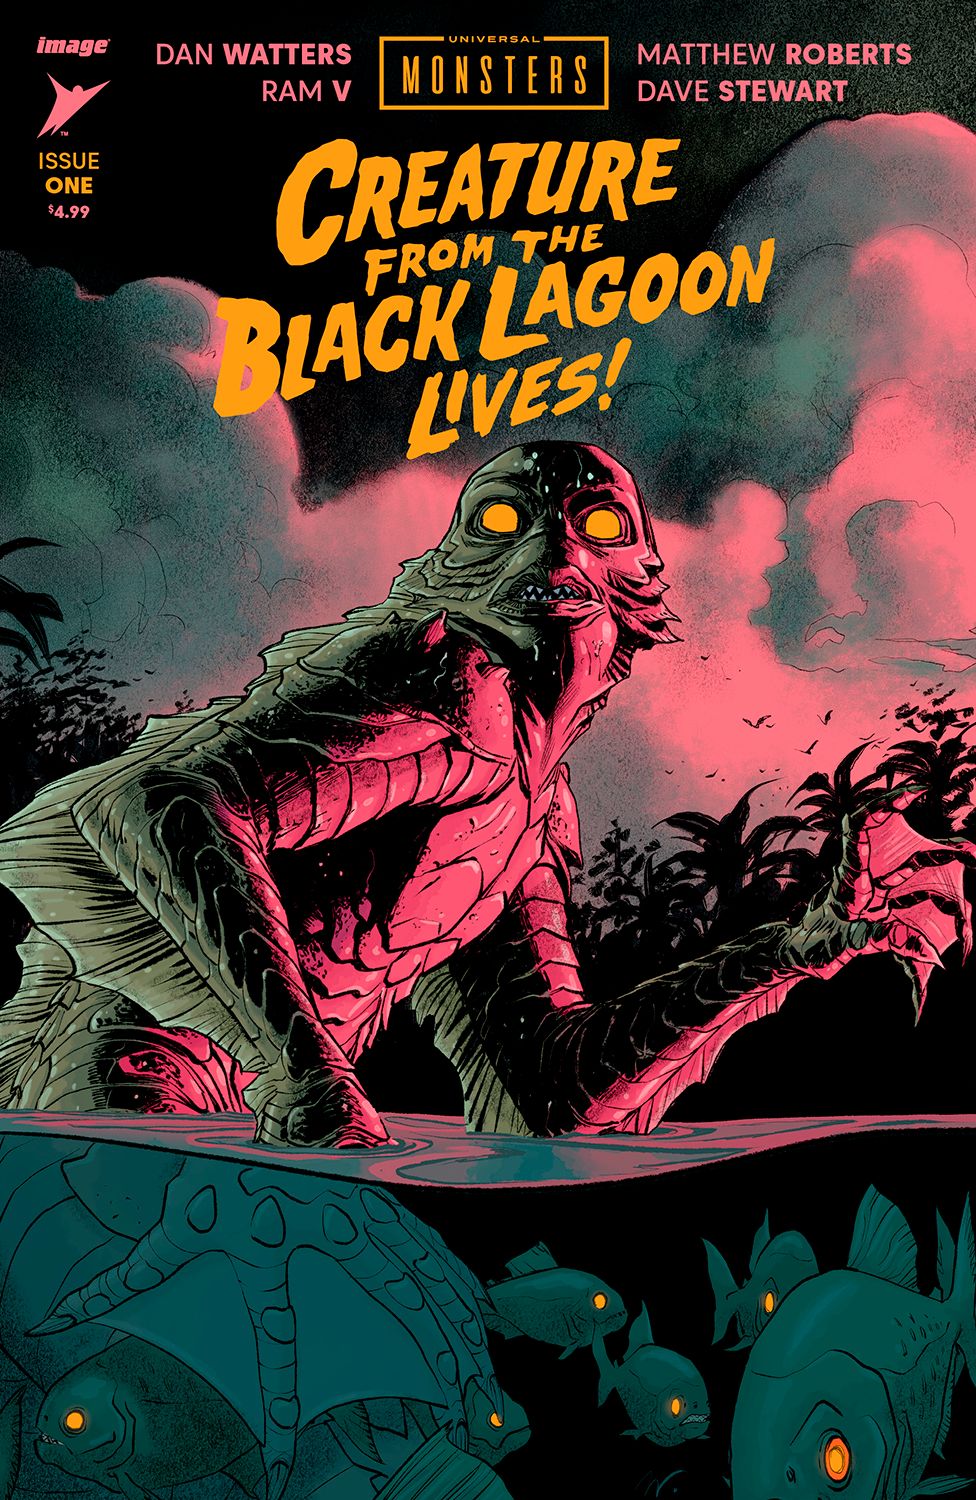 Universal Monsters: Creature From The Black Lagoon Lives! Comic